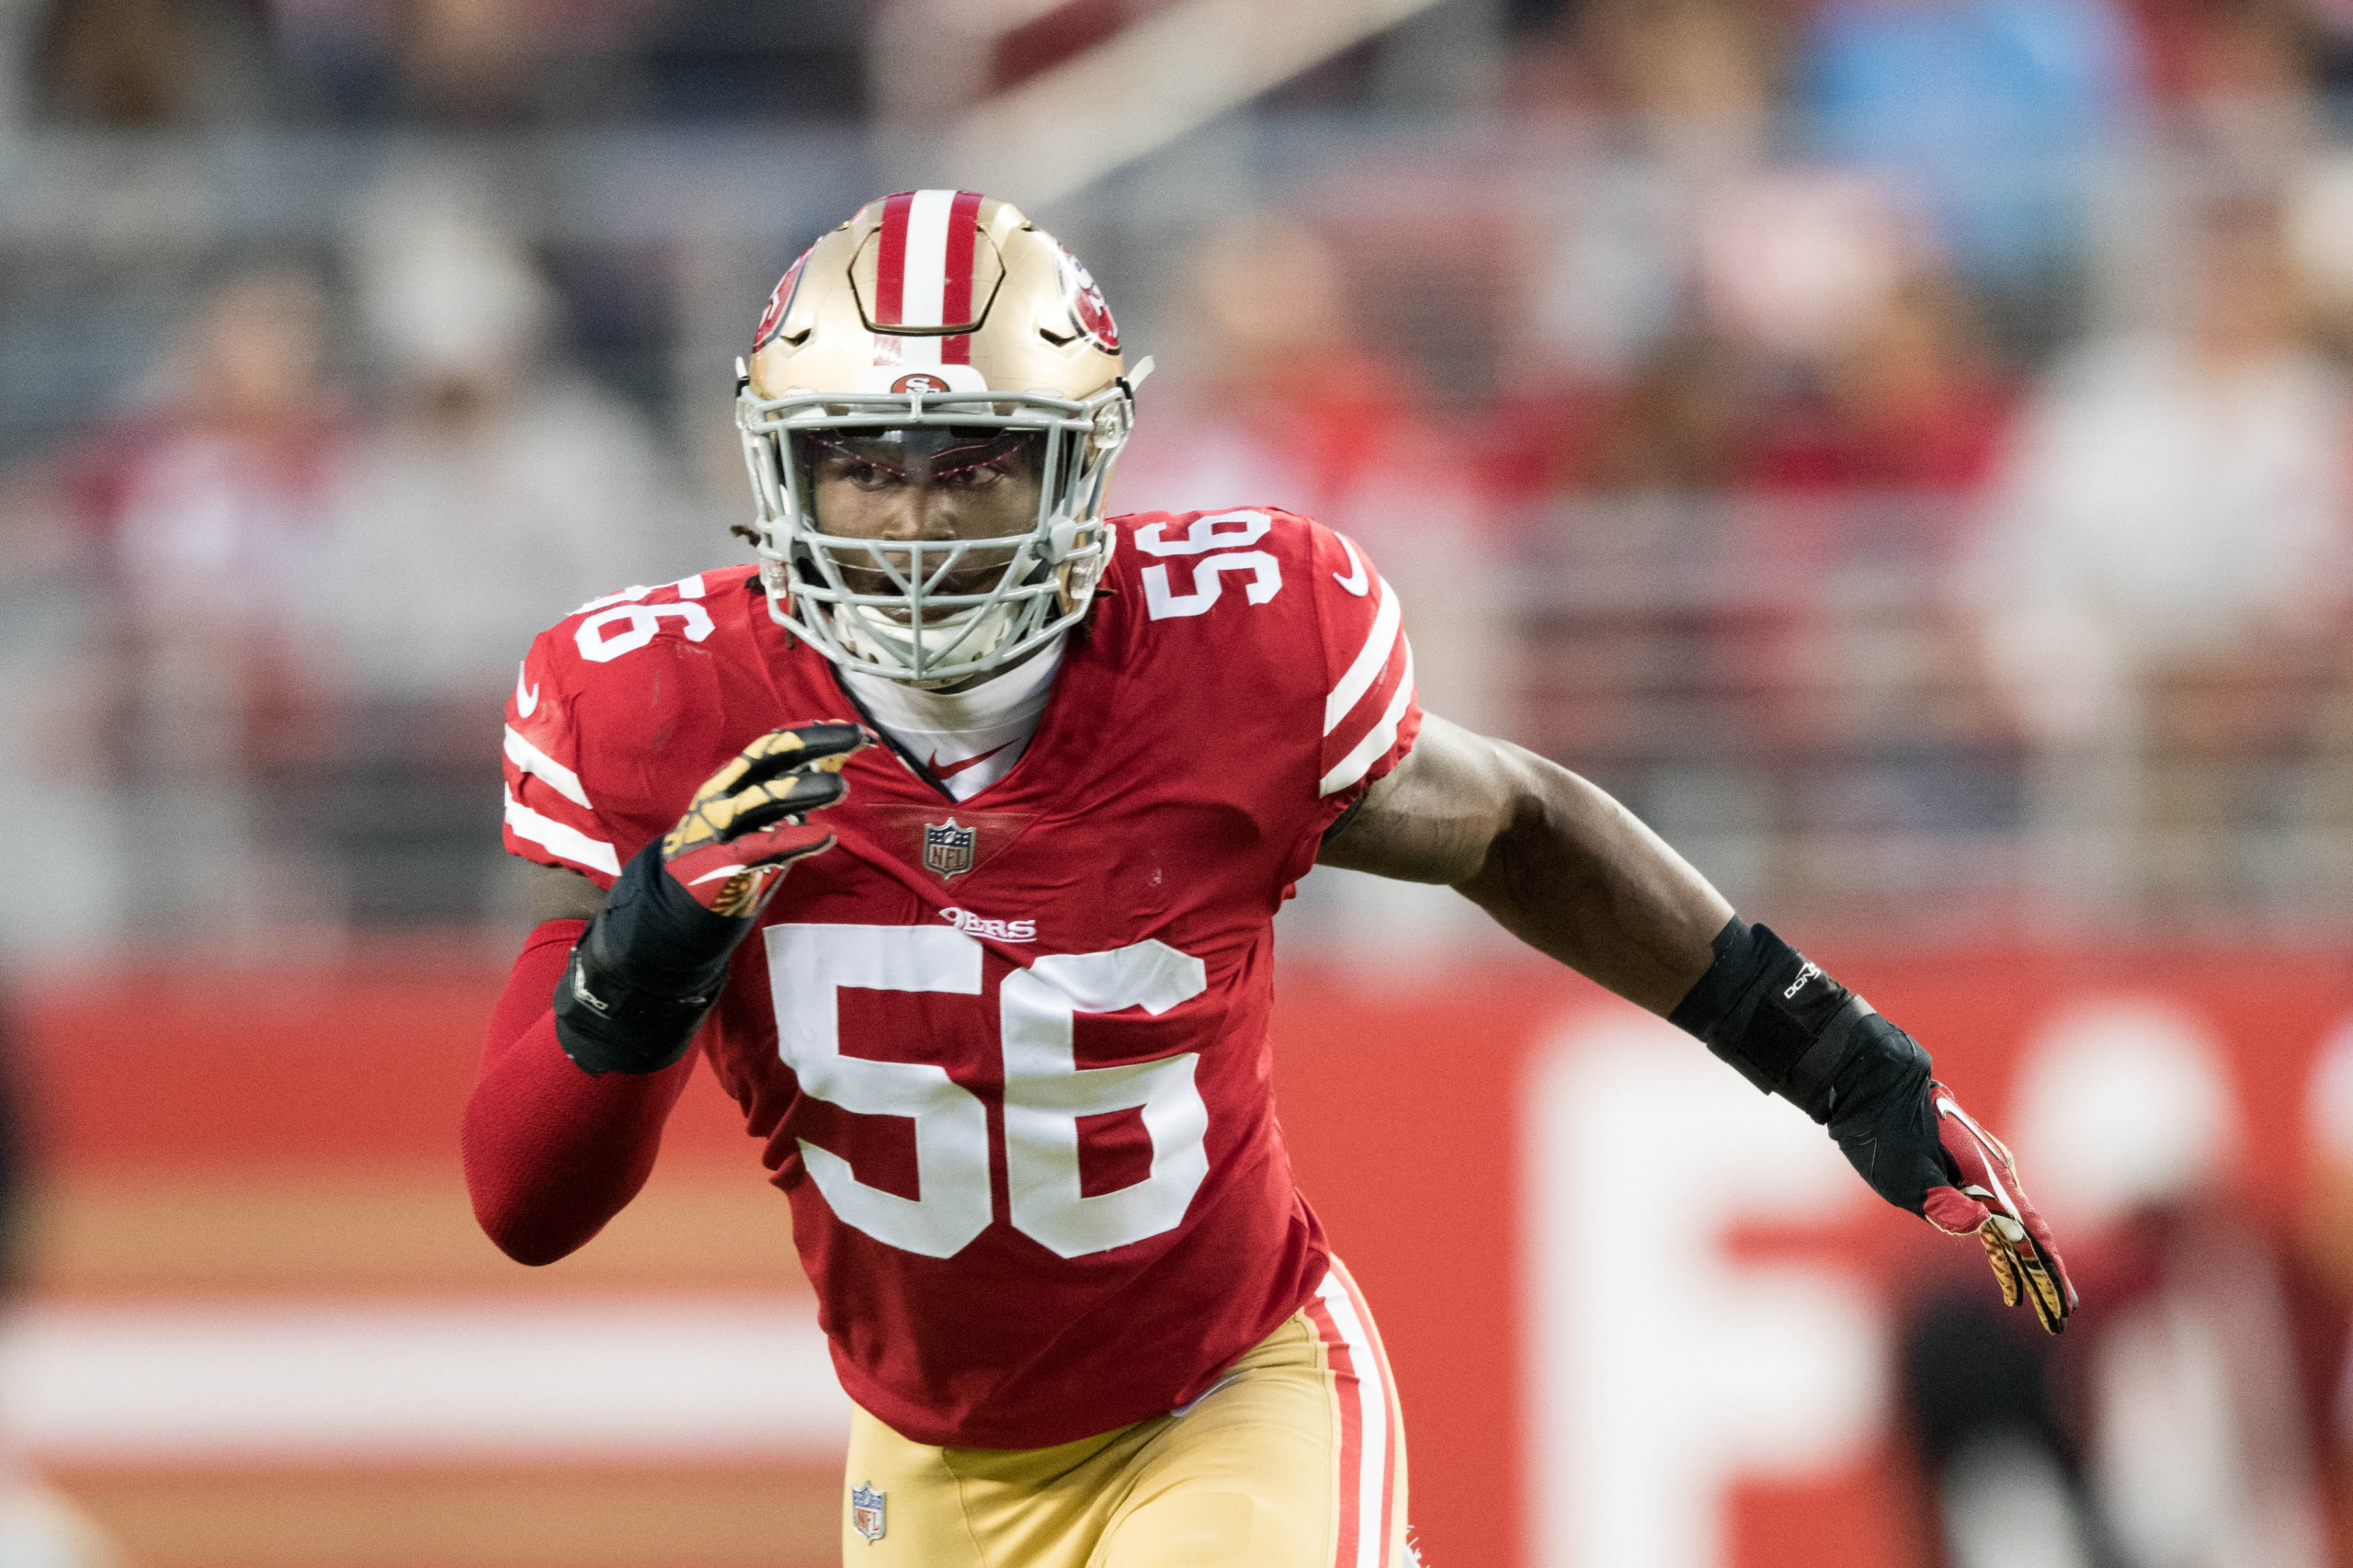 Former first-round linebacker Reuben Foster attempting comeback with USFL’s Pittsburgh Maulers